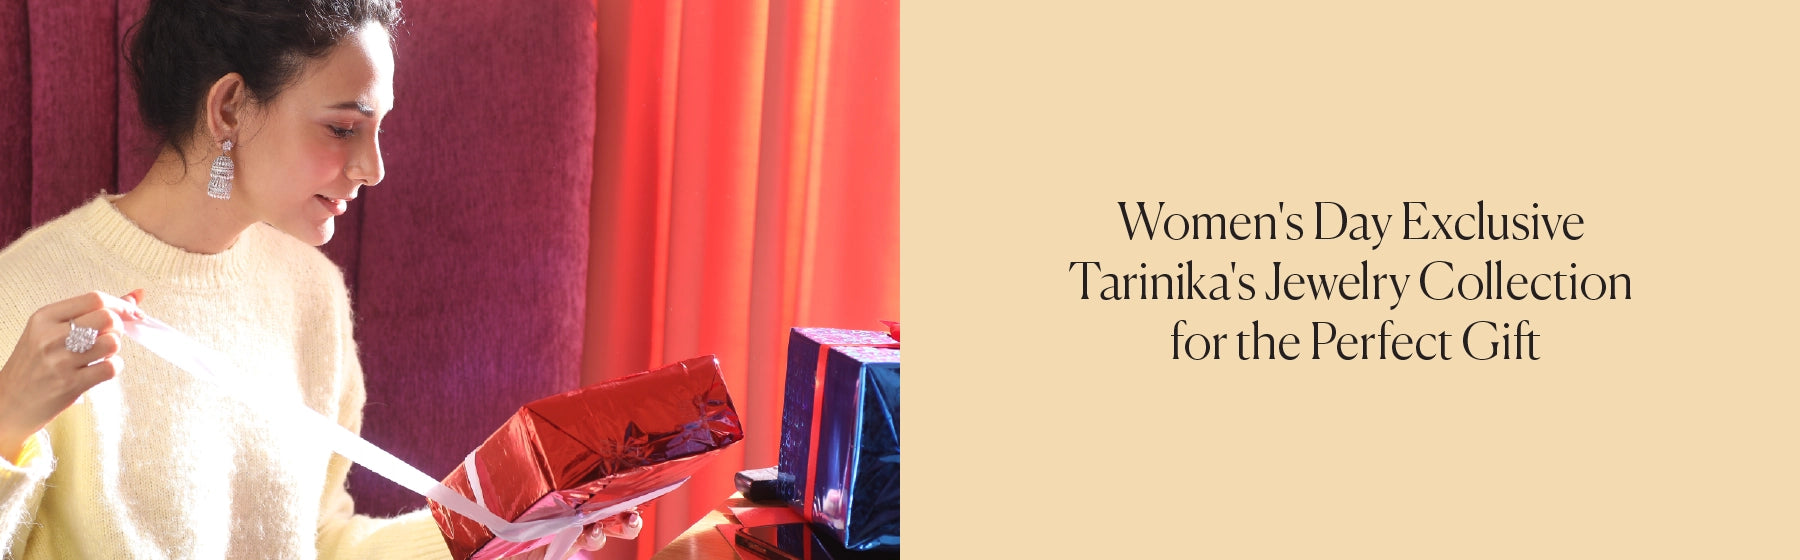 Women's Day Exclusive: Tarinika's Jewelry Collection for the Perfect Gift